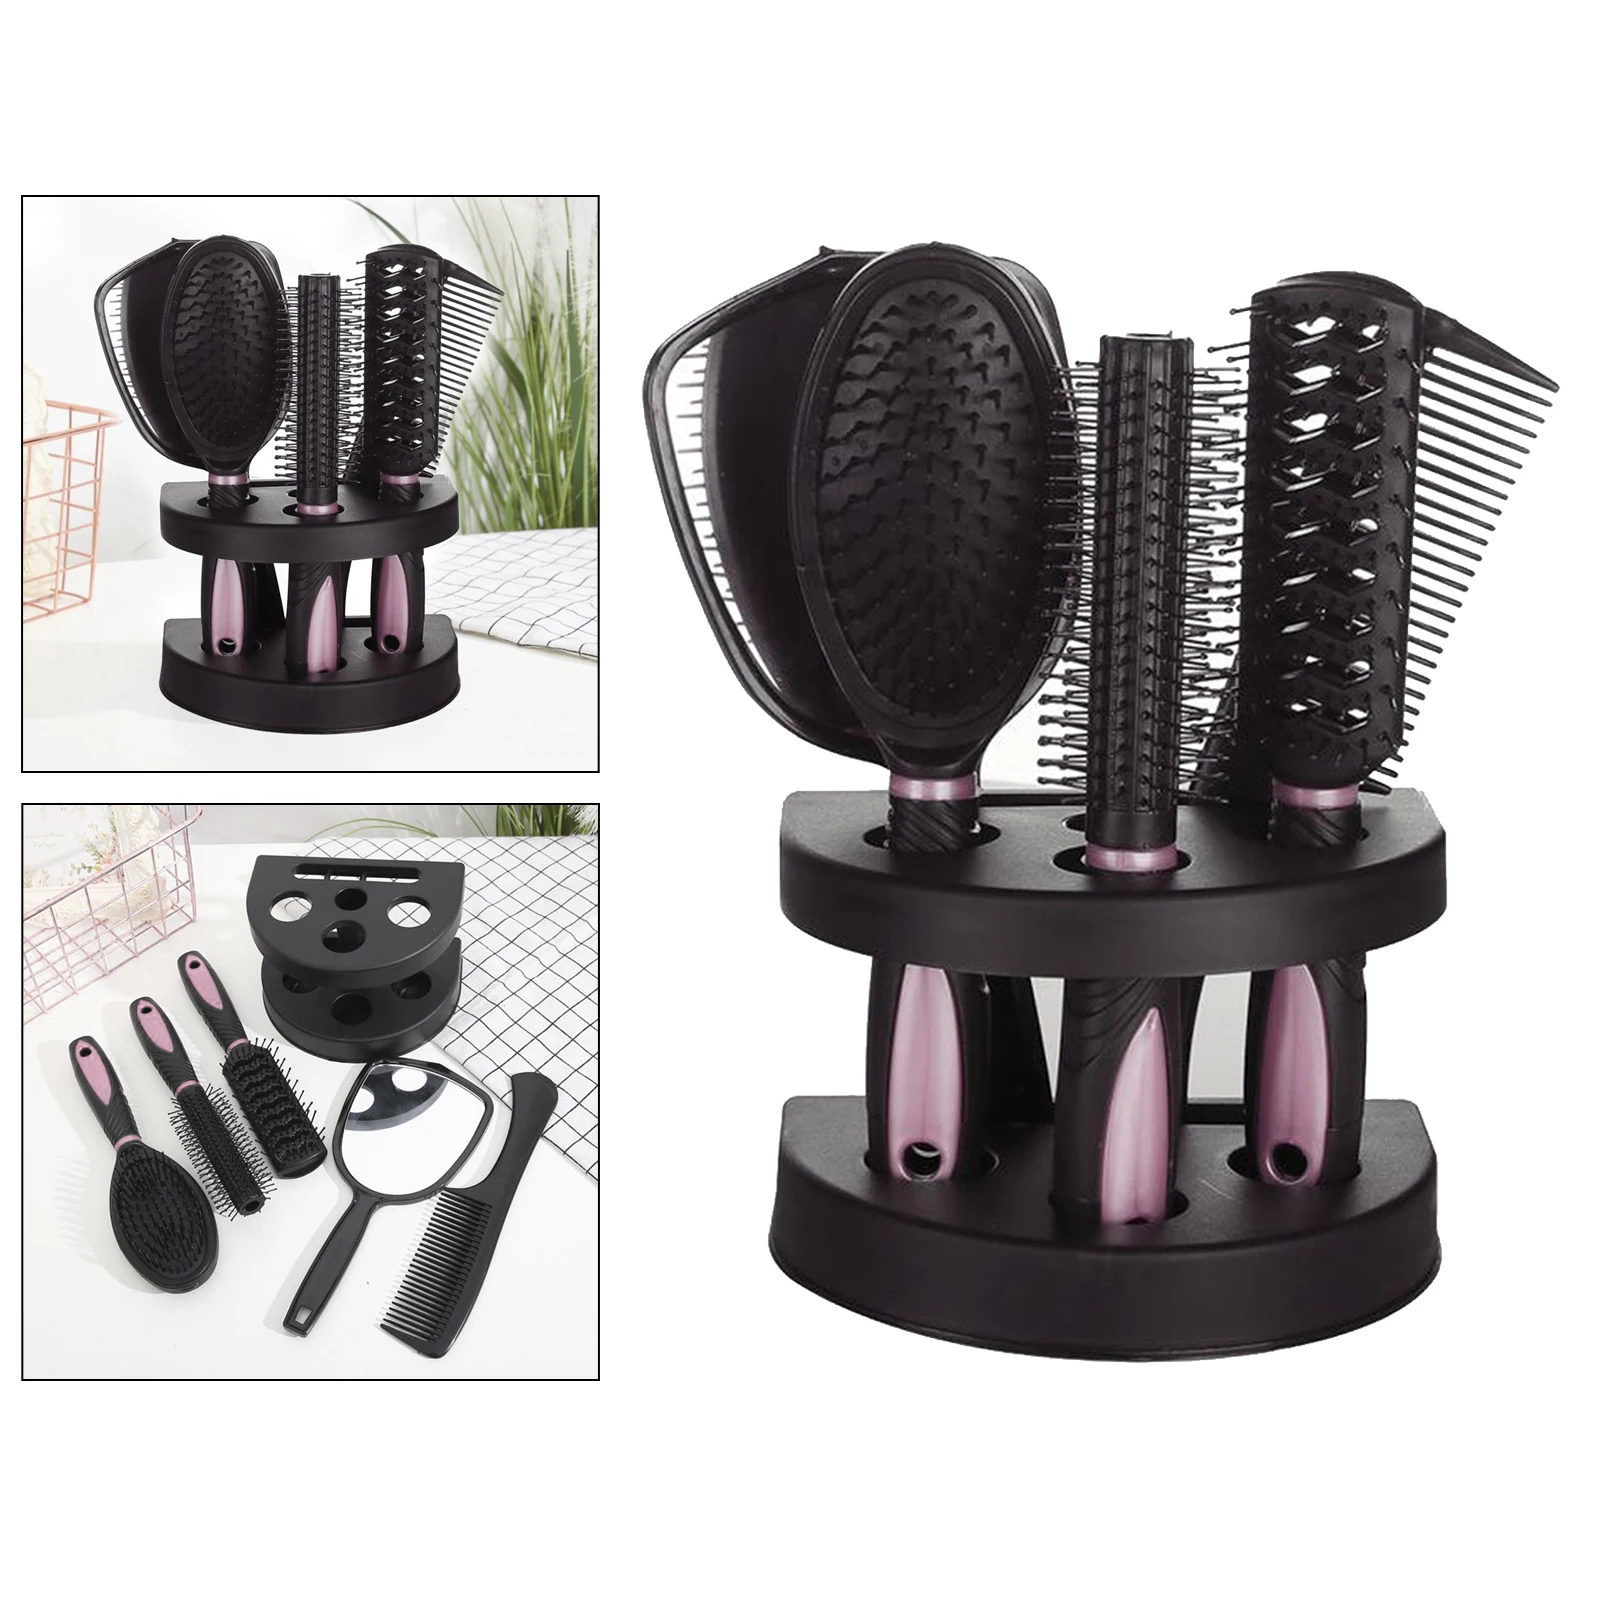 New 5x Professional Salon Hair Brush Comb Set Mirror & Stand Holder Pack  Hair Curly Combs Highlighting Combs|Combs| - AliExpress